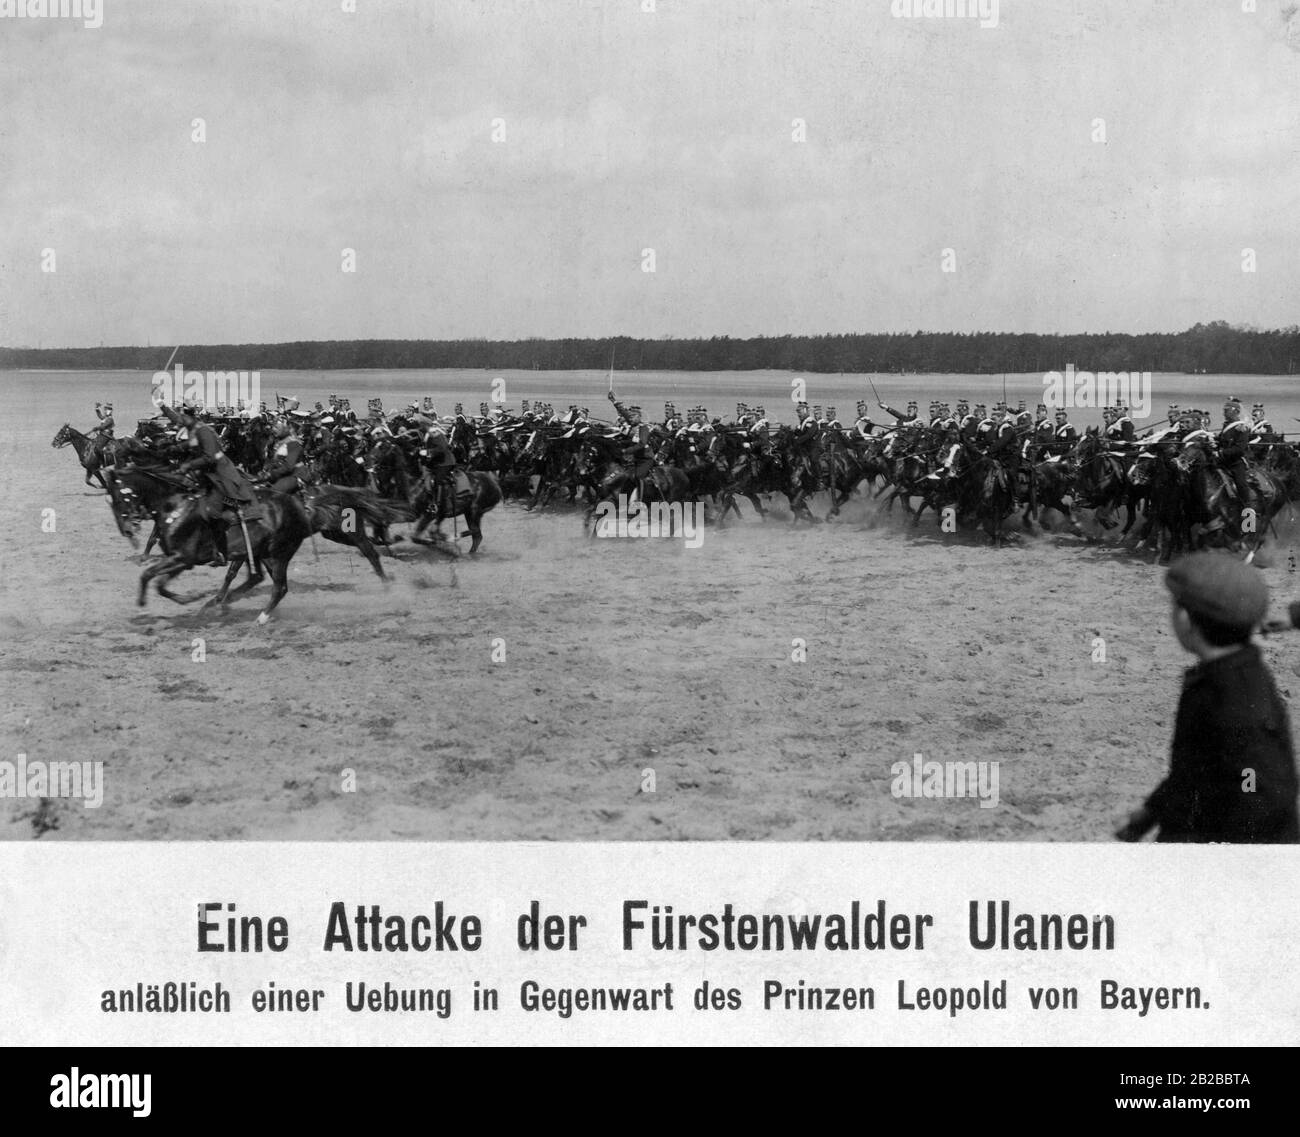 An attack of the Fuerstenwalde Uhlan regiment during an exercise in the presence of Prince Leopold of Bavaria. Stock Photo